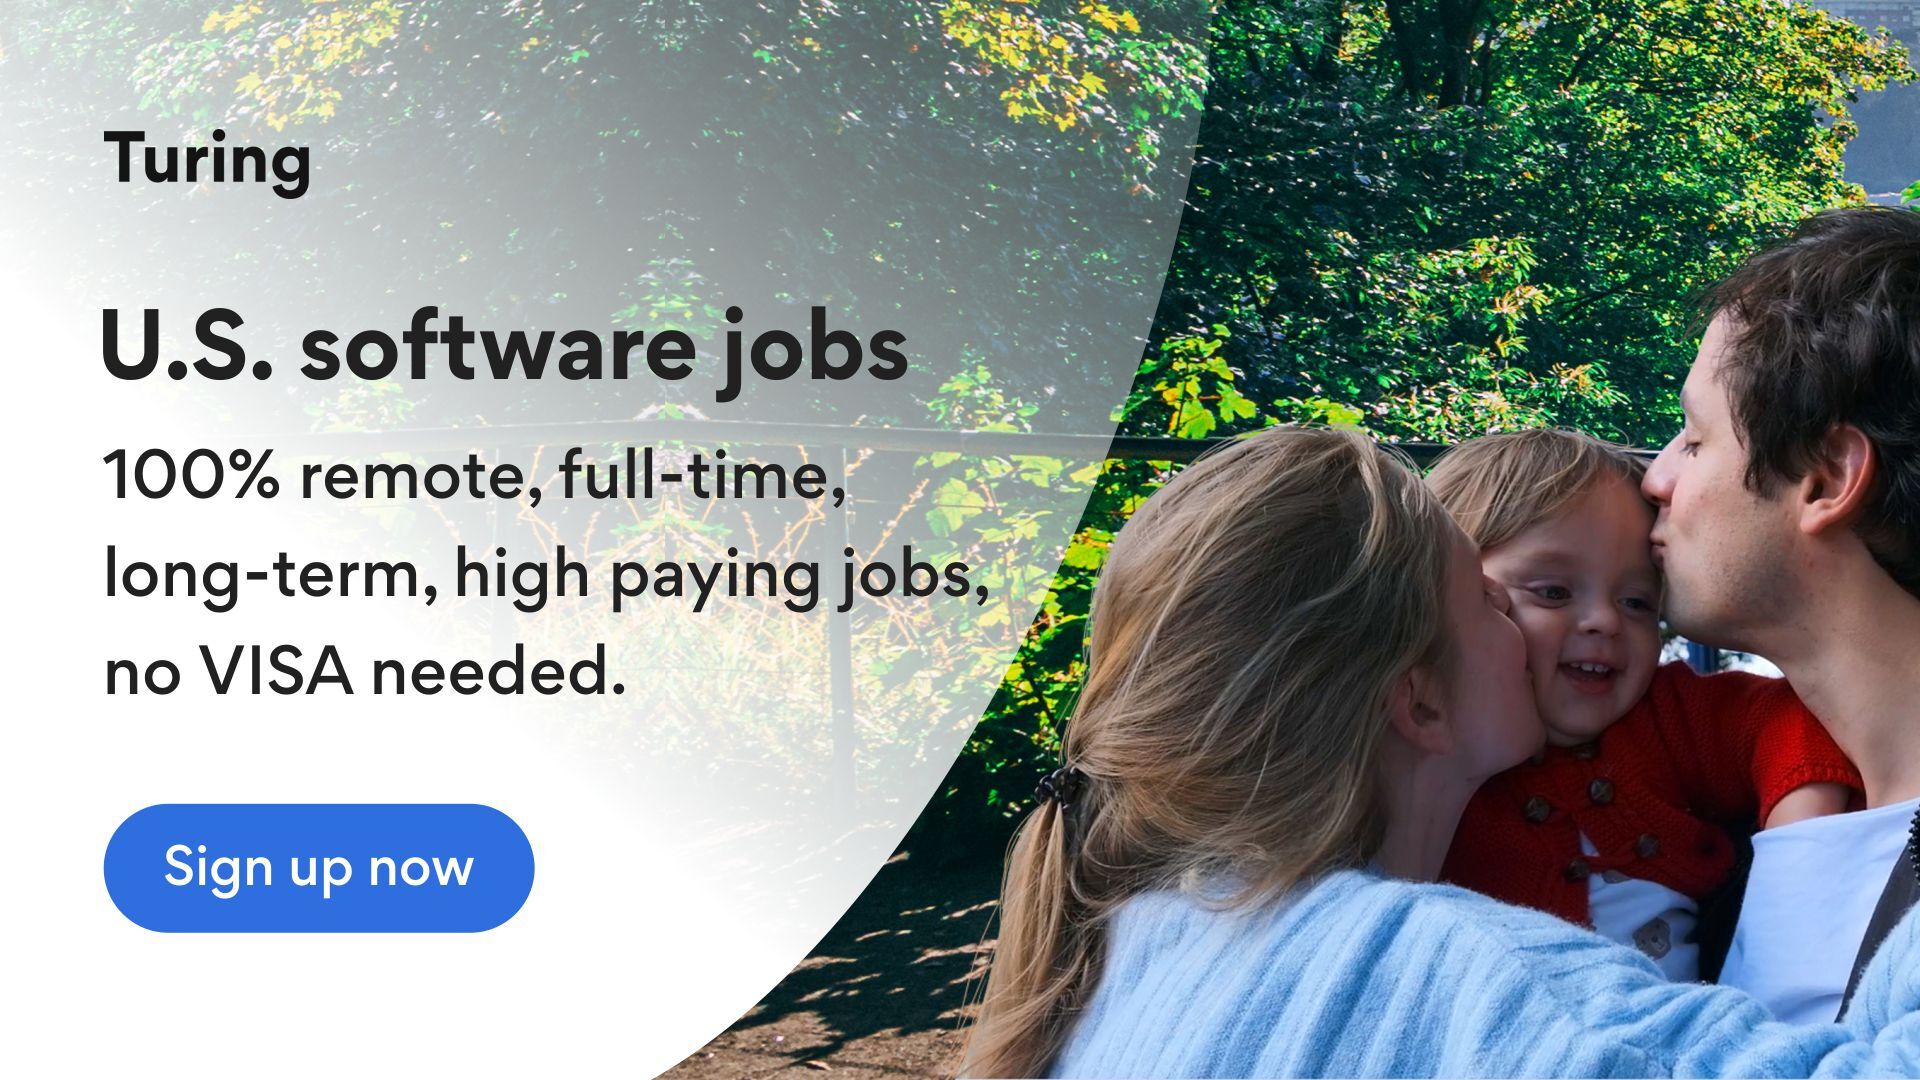 Turing - U.S. remote software jobs